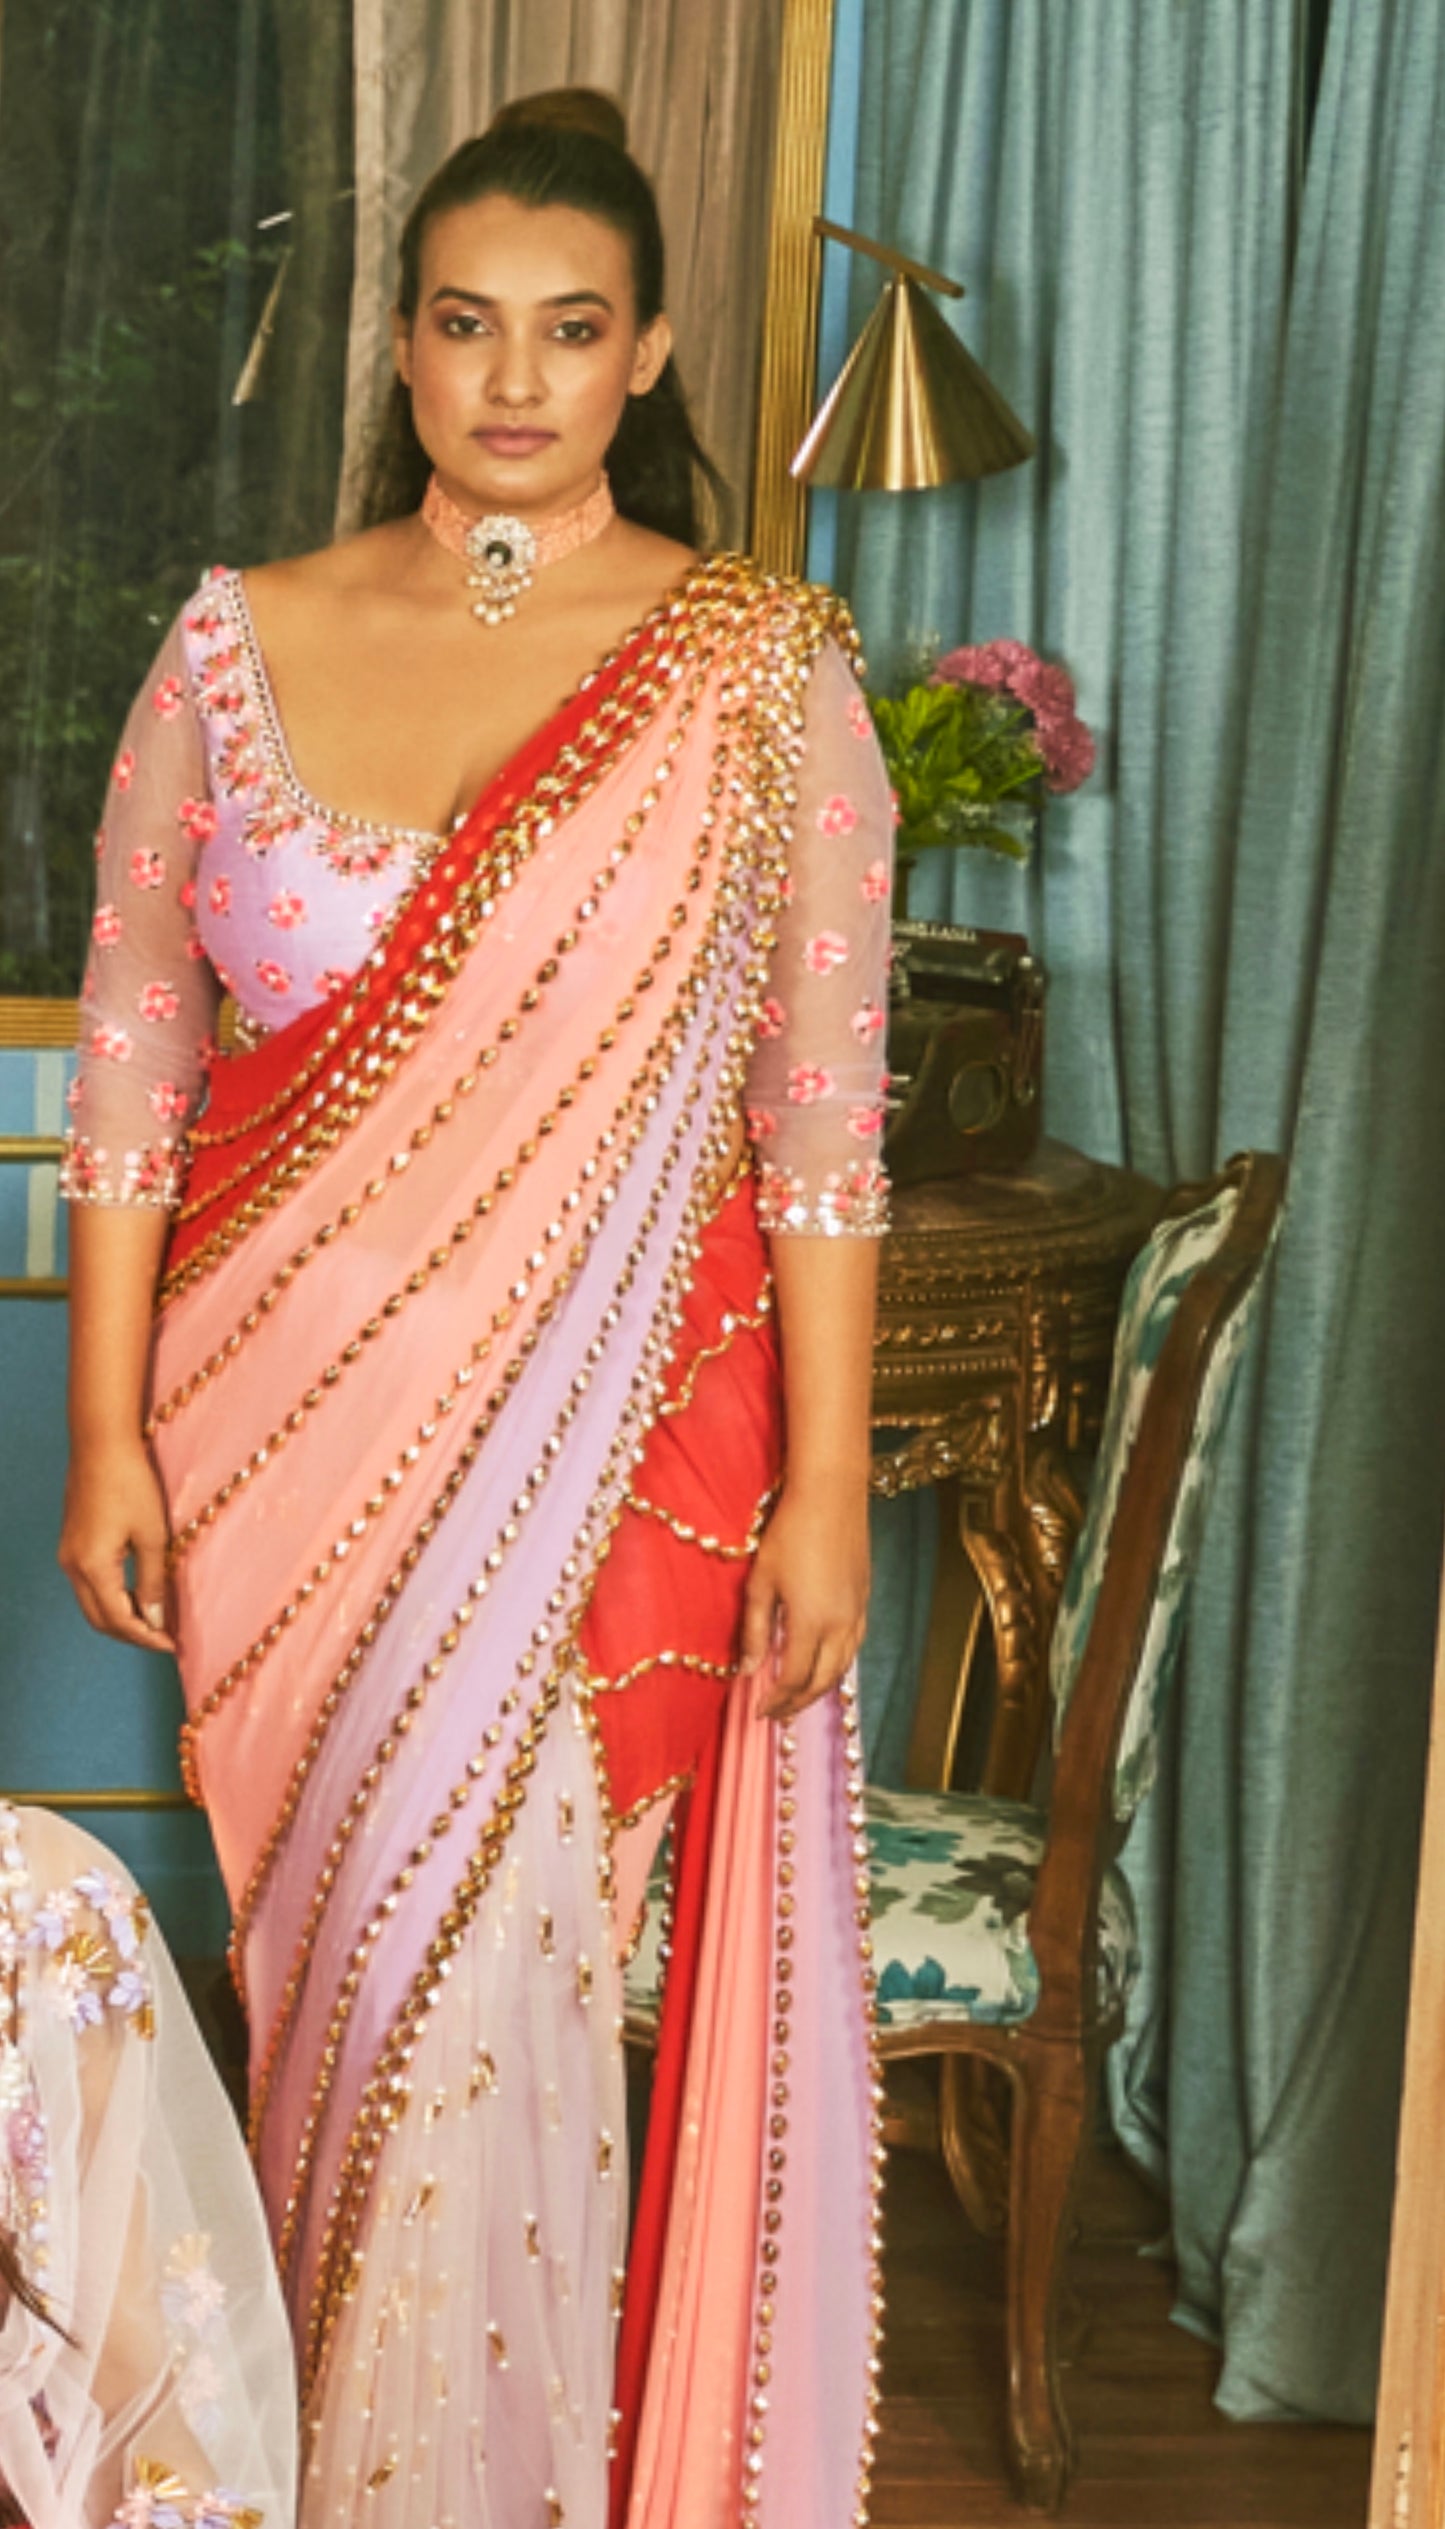 WHEN HE'S AROUND - MULTI-COLORED EMBELLISHED PRE-STICHED SAREE SET